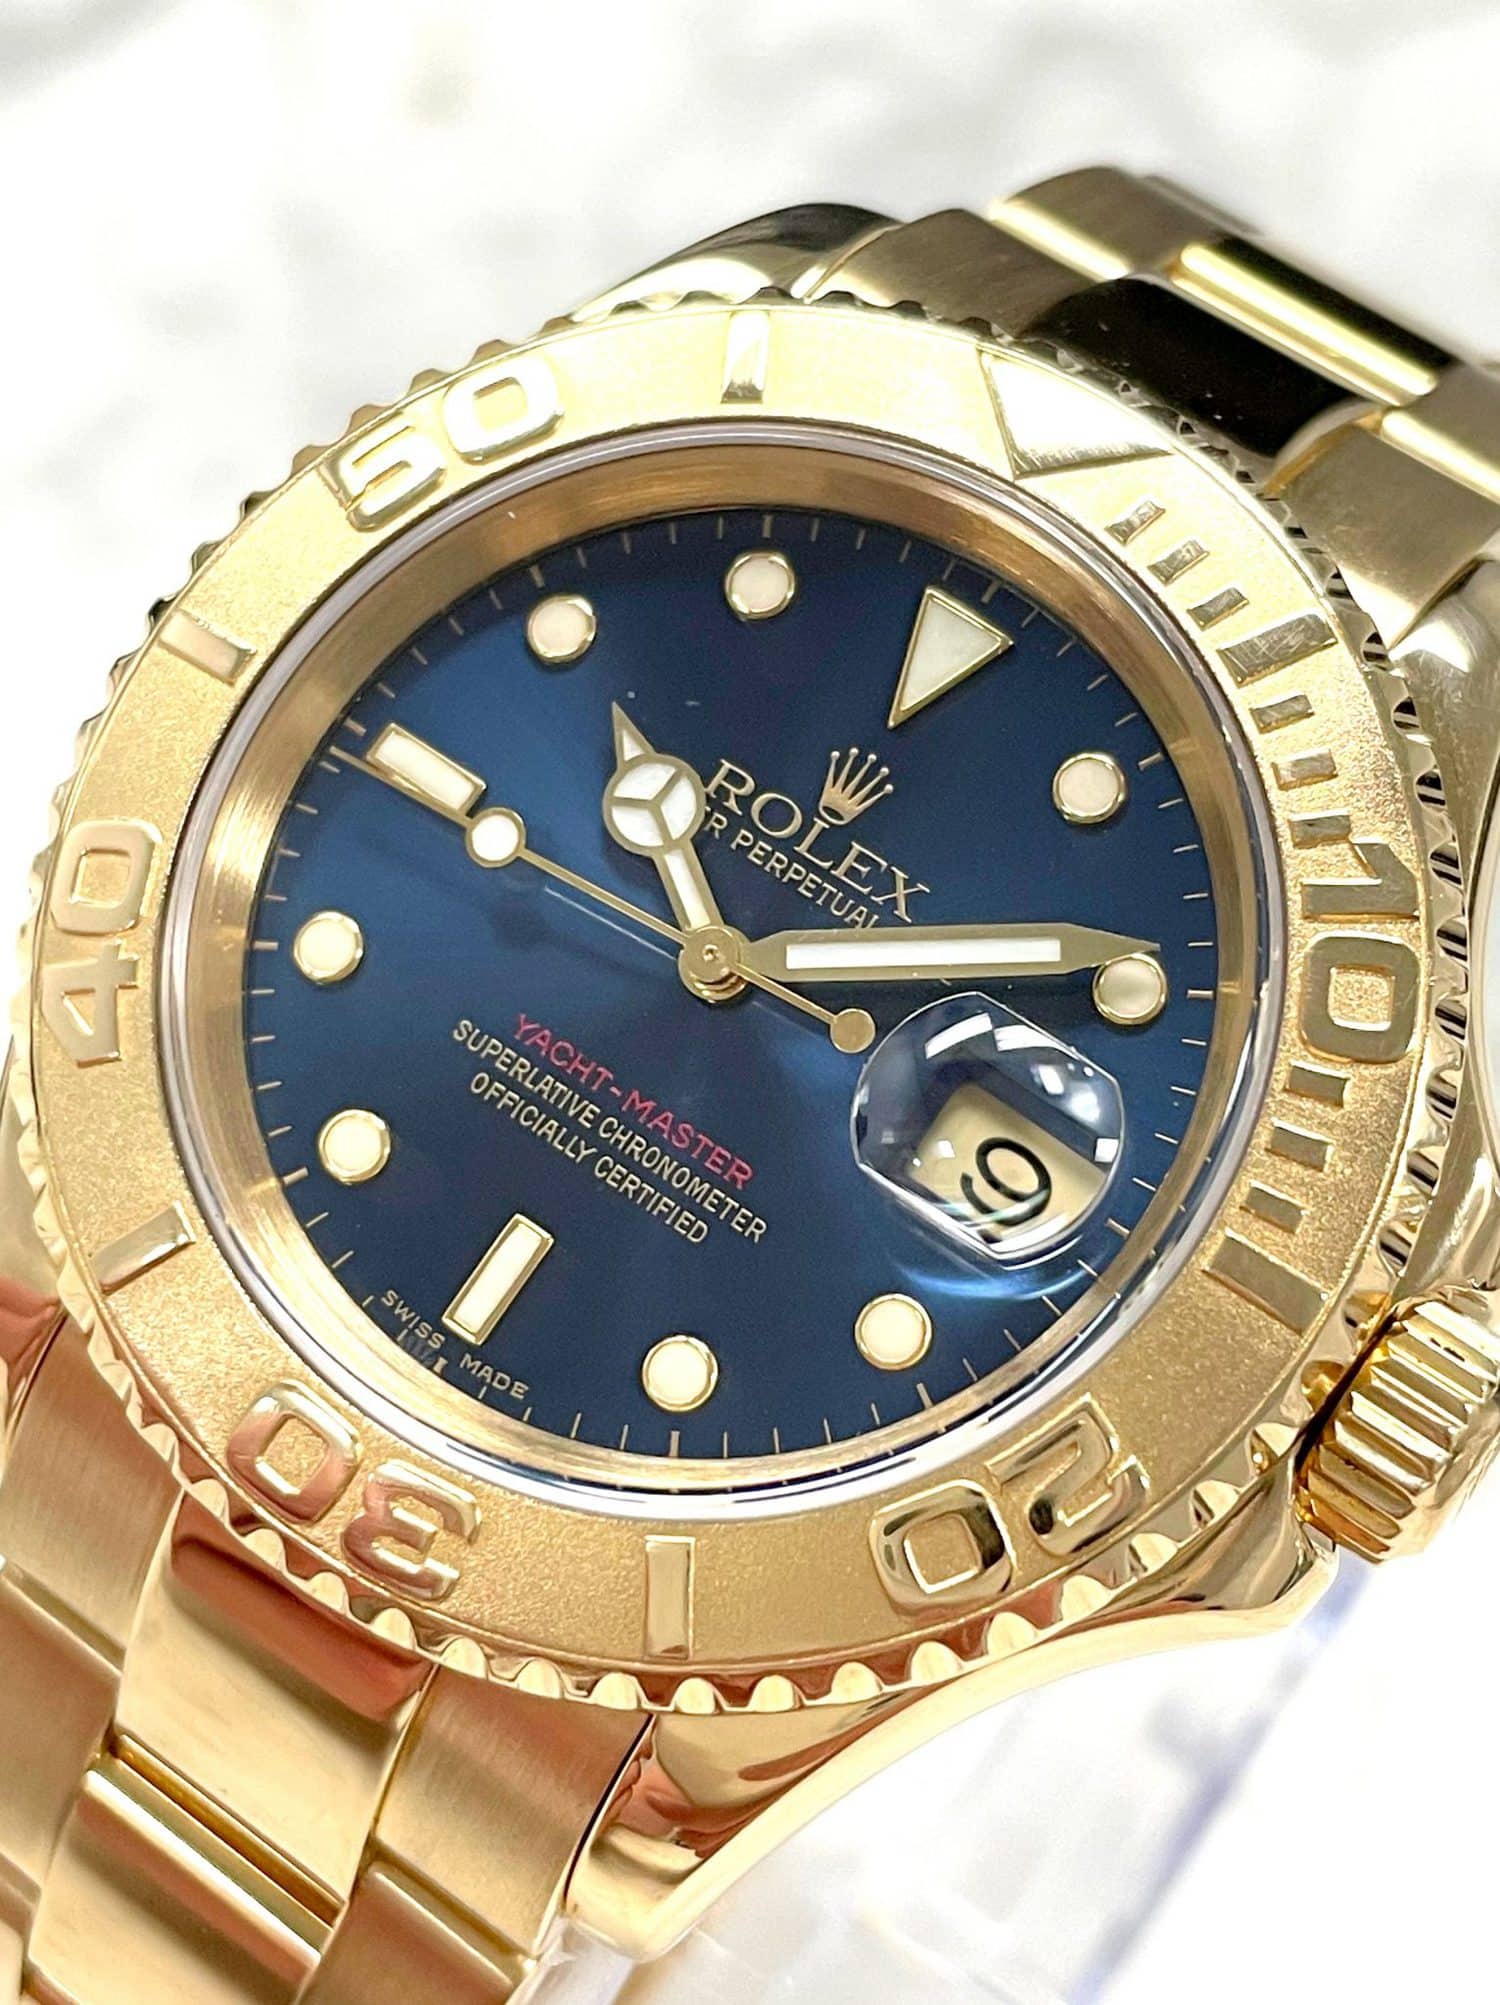 yachtmaster 1 vollgold